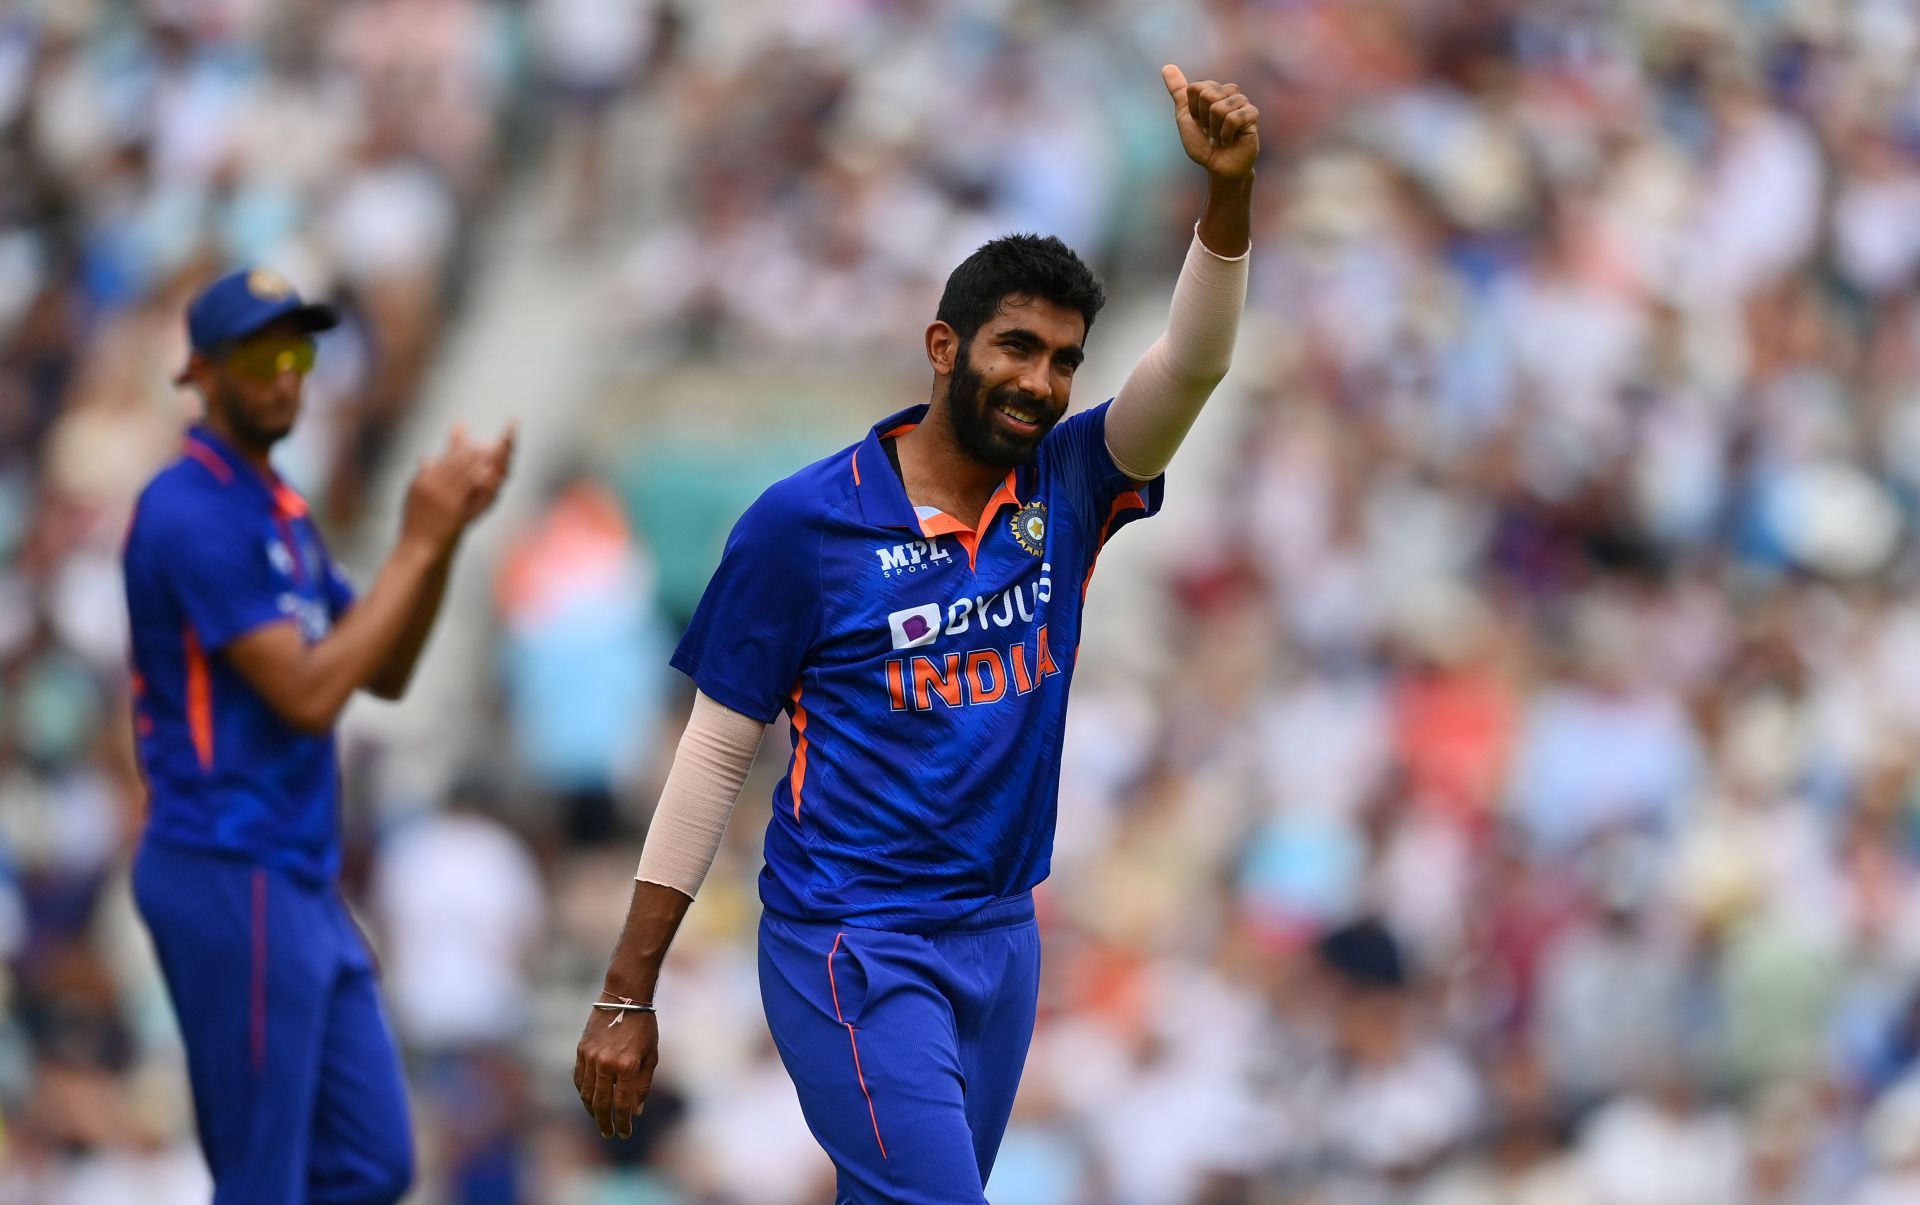 Jasprit Bumrah returned with 6/19 in the first ODI against England.